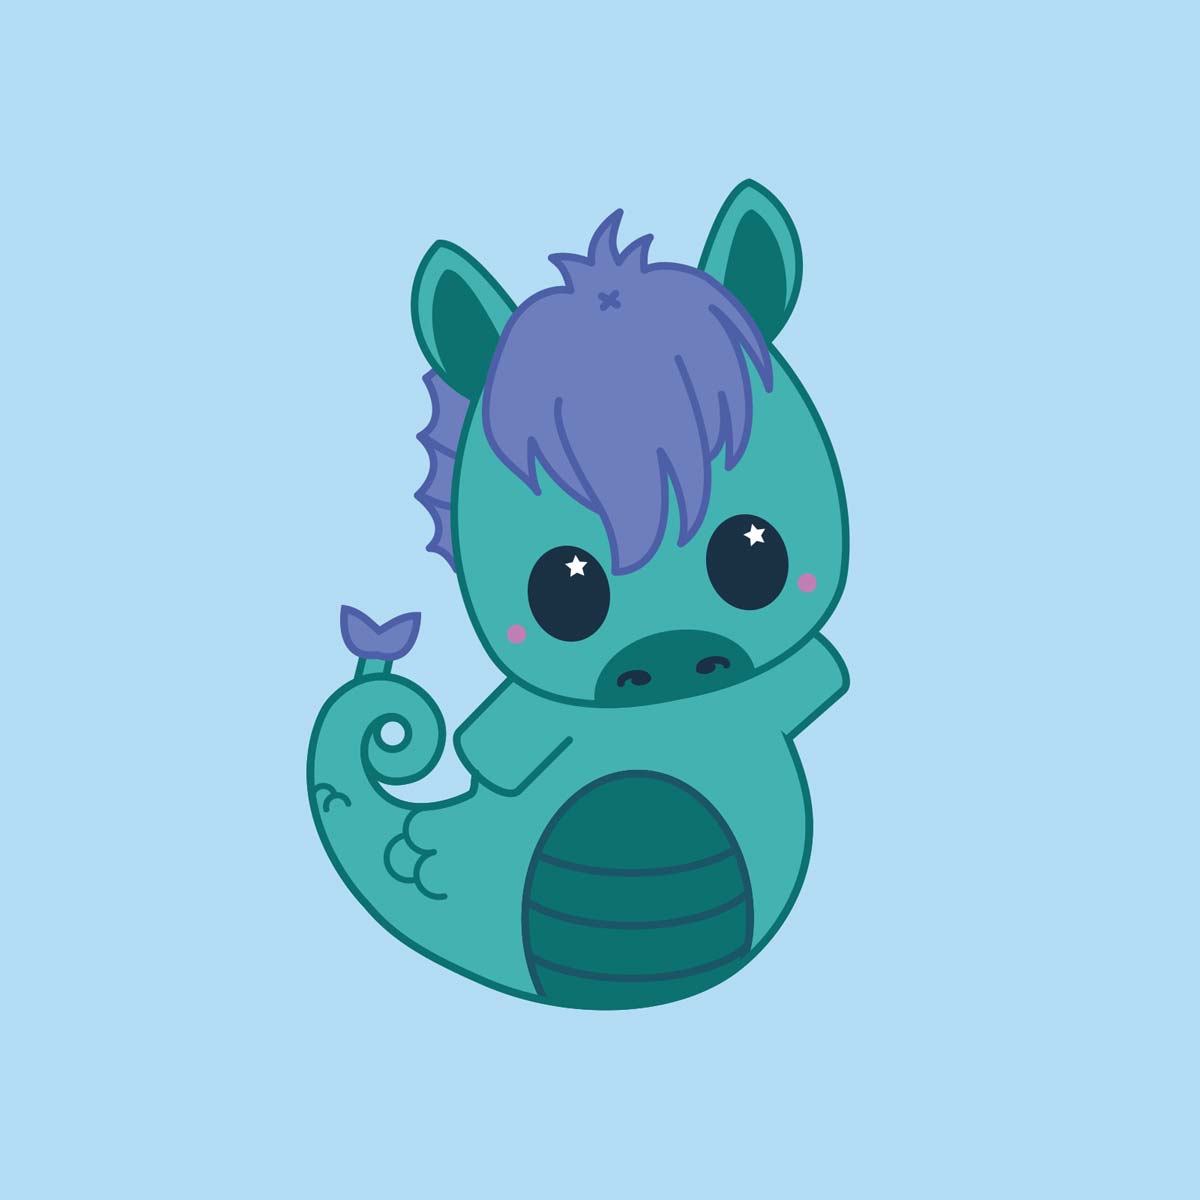 Graphic Design for Ackerly Green Publishing: Herman the Hippocampus